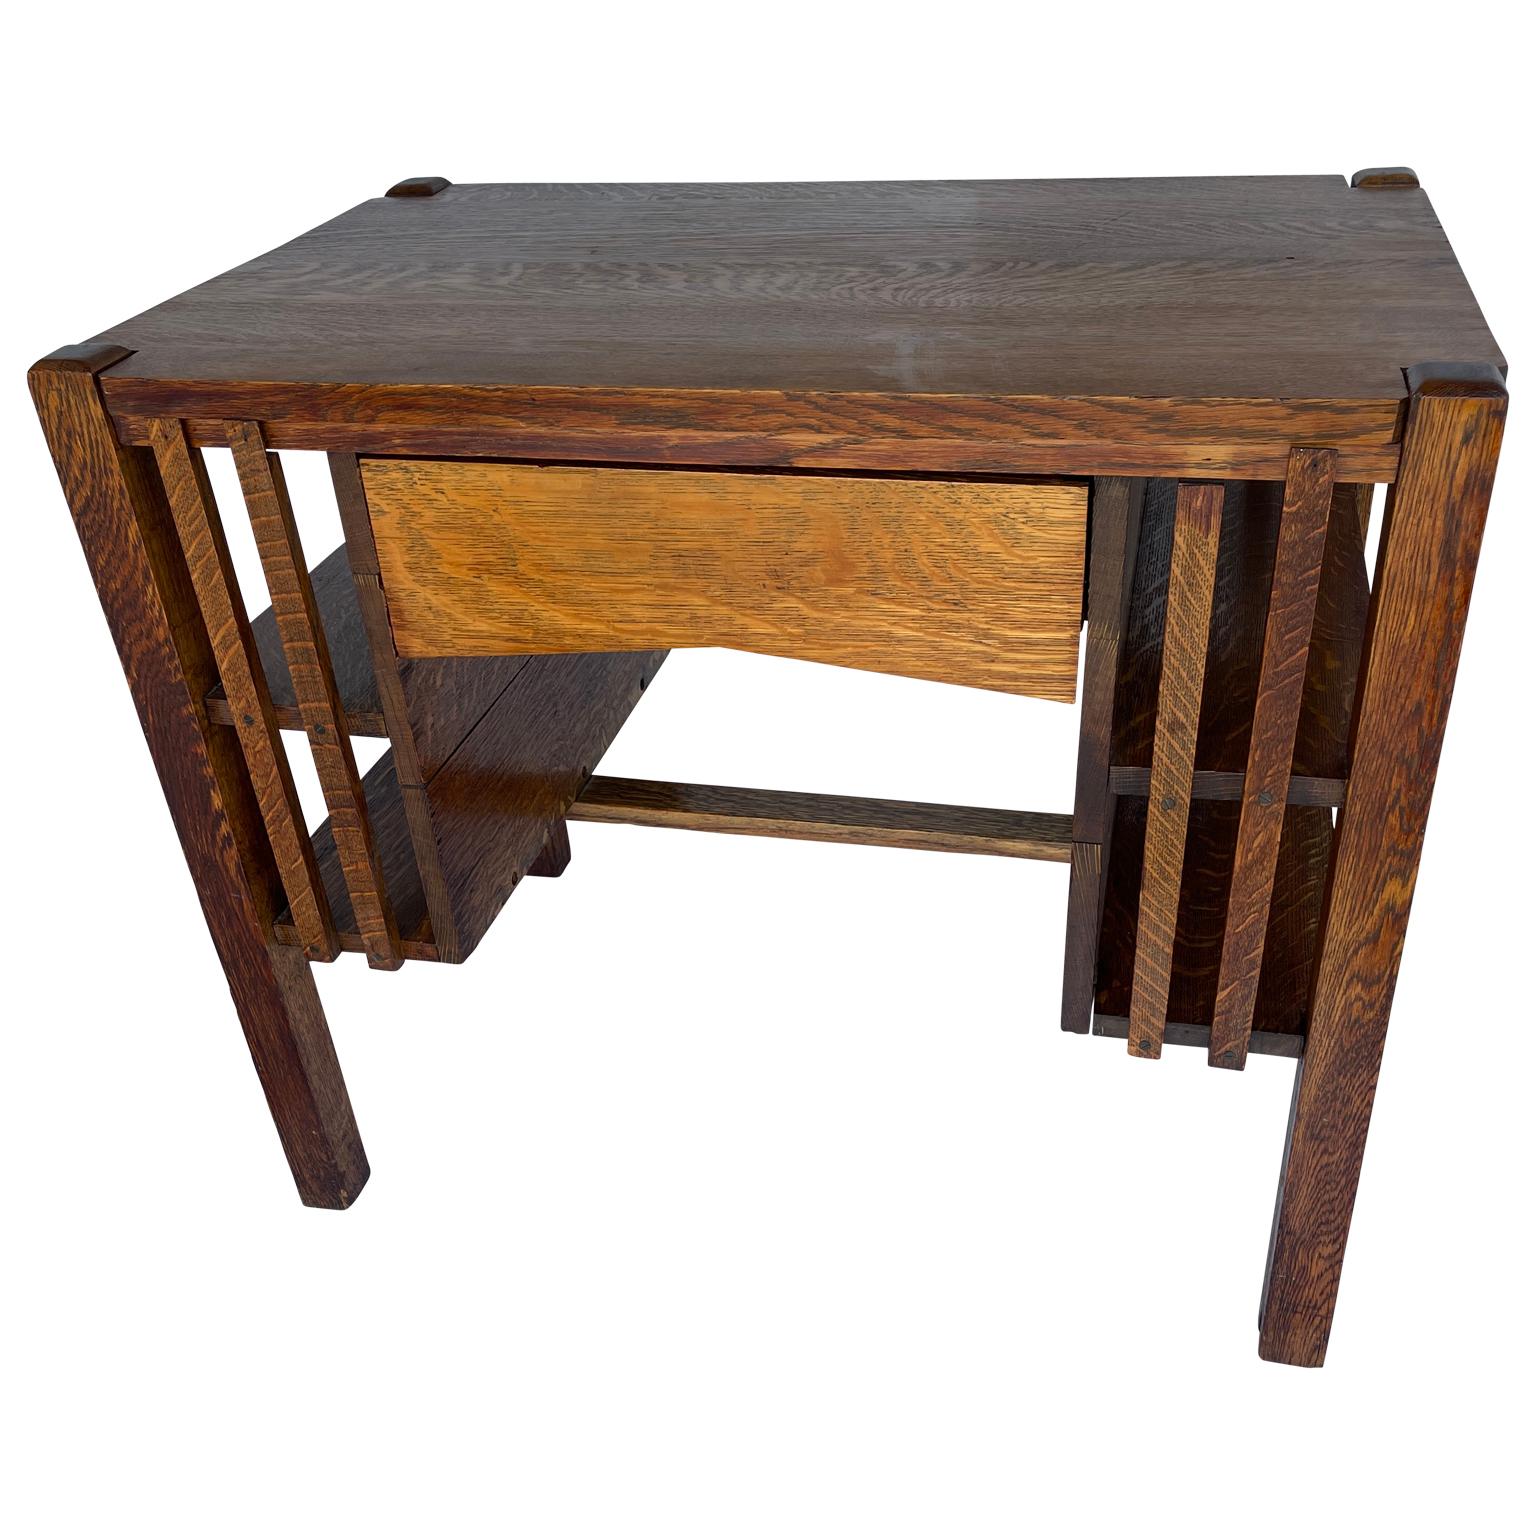 Arts and Crafts Quarter Mission Oak Desk. This beautiful Arts and Crafts era desk Mission style furniture originated in the late 19th century. The Mission desk emphasizes simple horizontal and vertical lines and flat panels that accentuate the grain